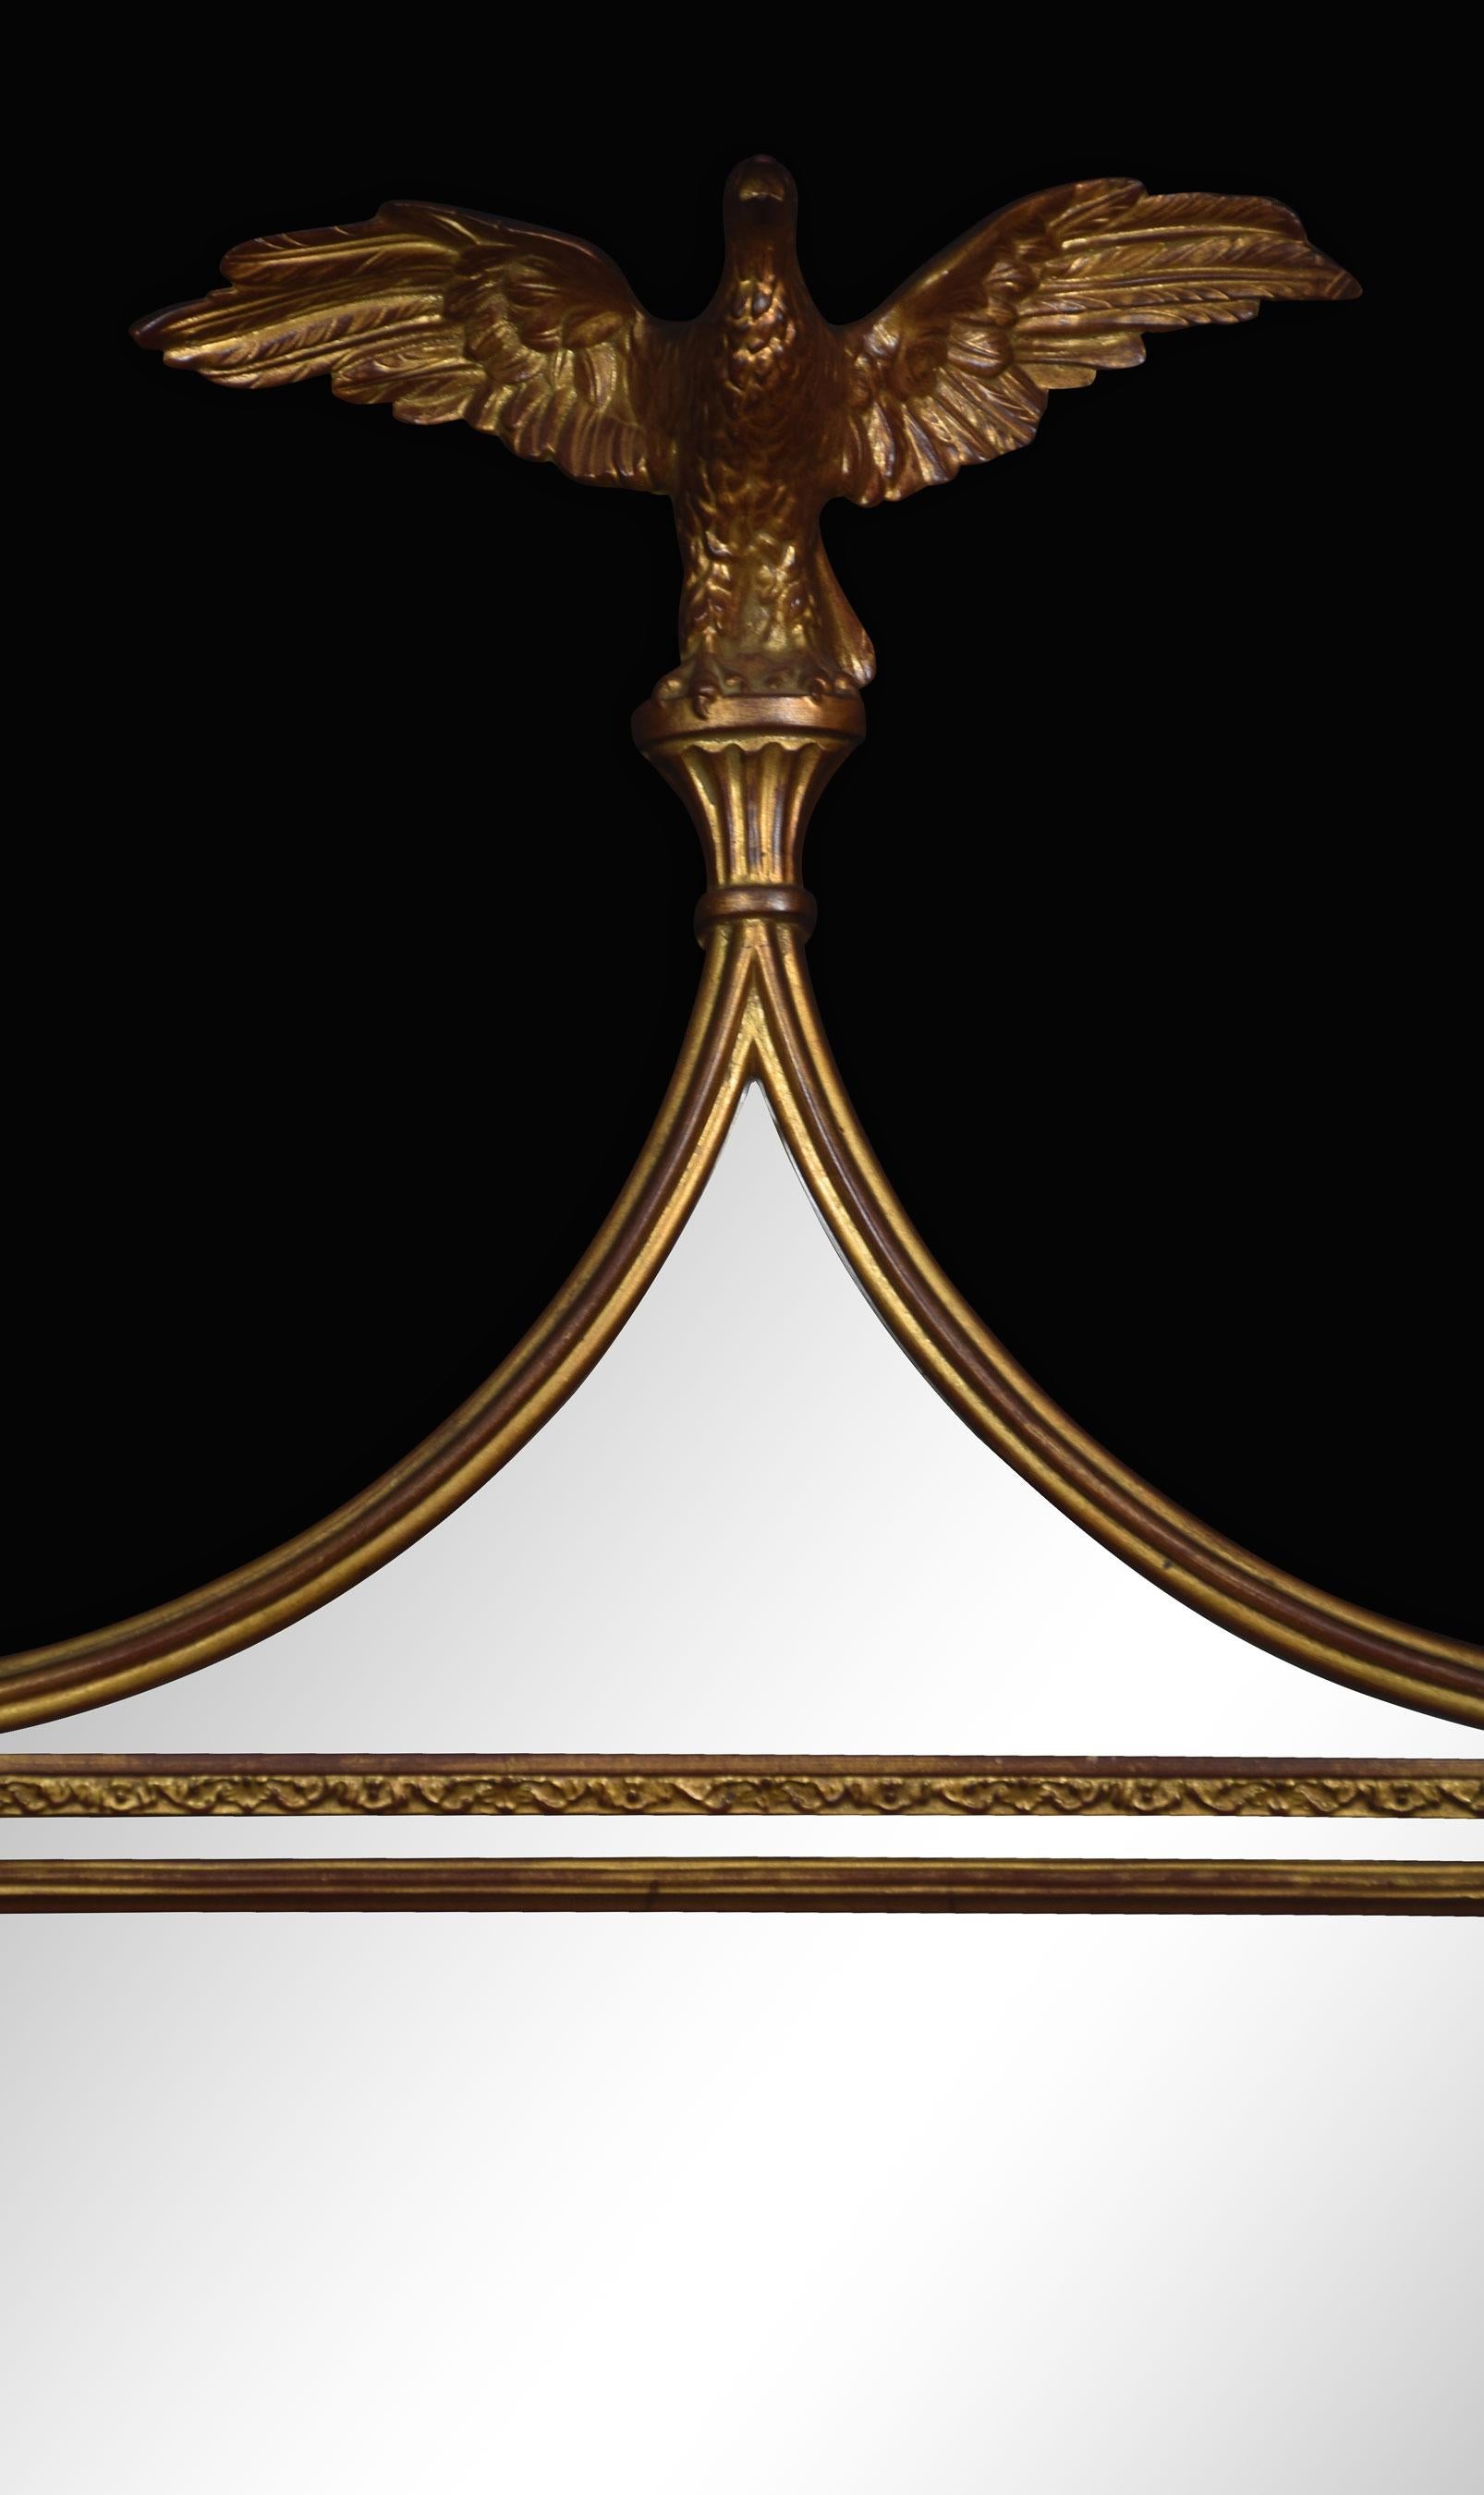 Regency style pier mirror, surmounted by eagle finials above original rectangular mirror plate enclosed by moulded frame.
Dimensions:
Height 48.5 inches
Width 20.5 inches
Depth 1.5 inches.